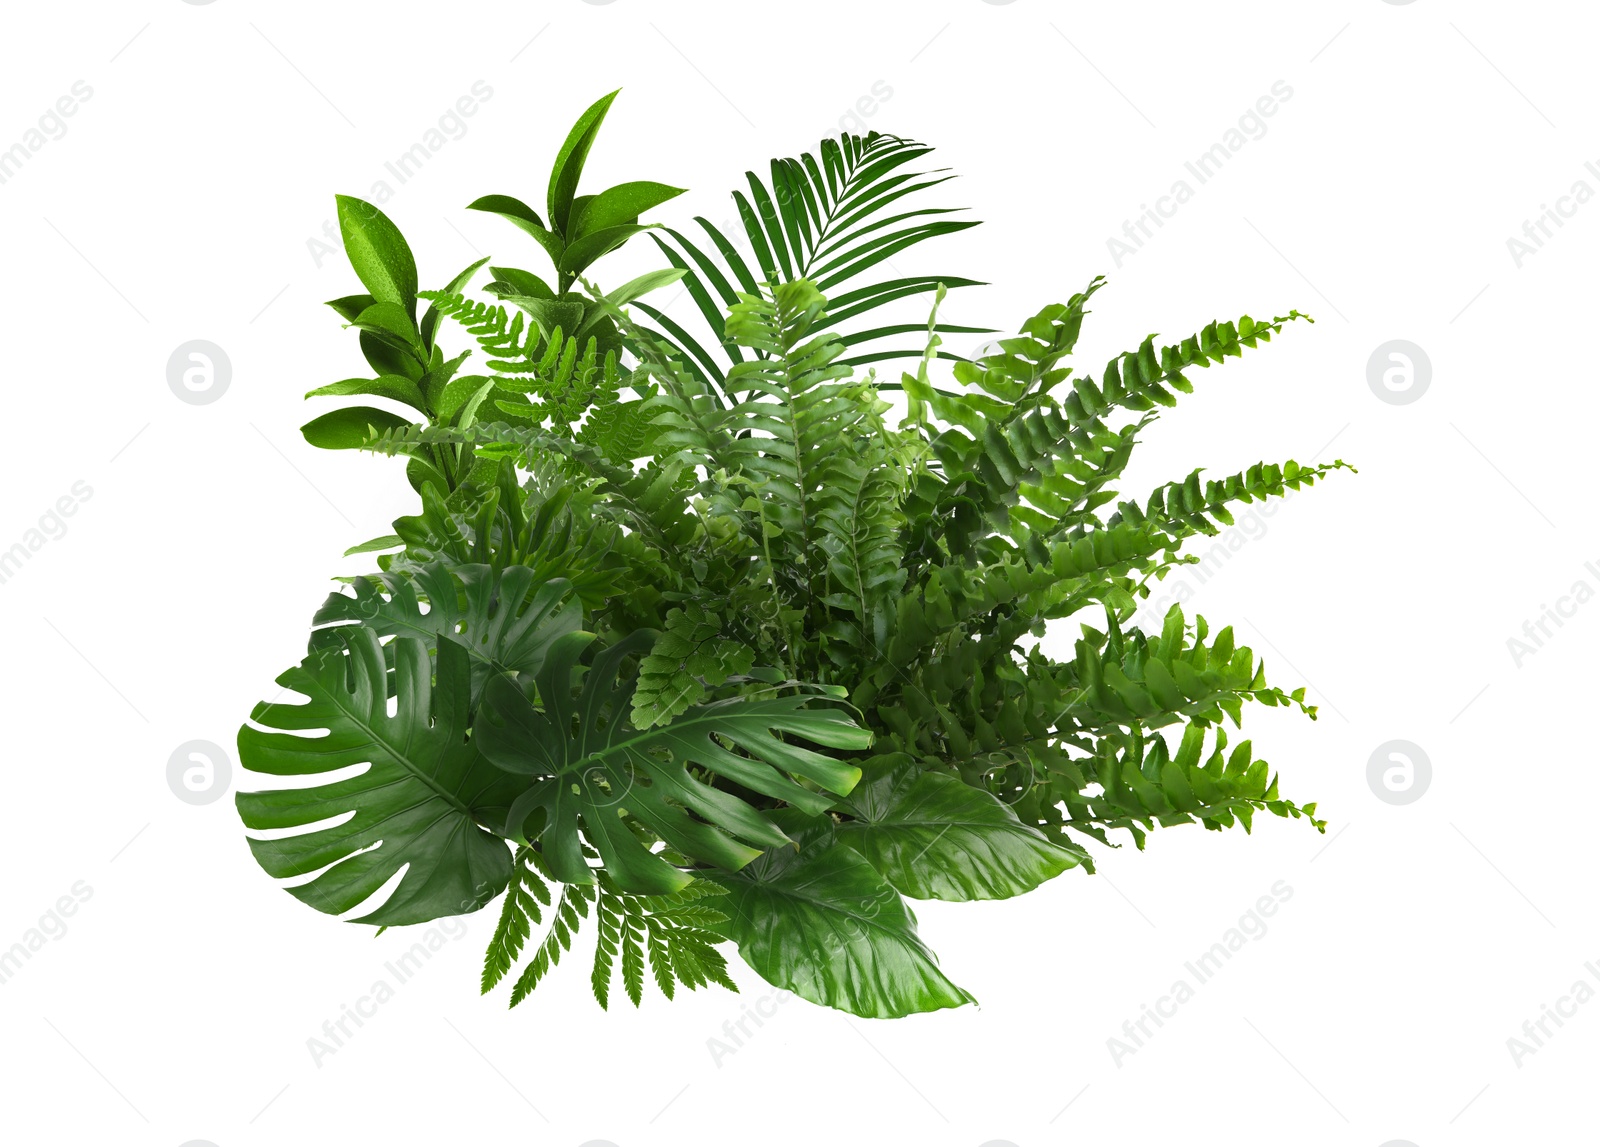 Image of Beautiful composition with fern and other tropical leaves on white background.